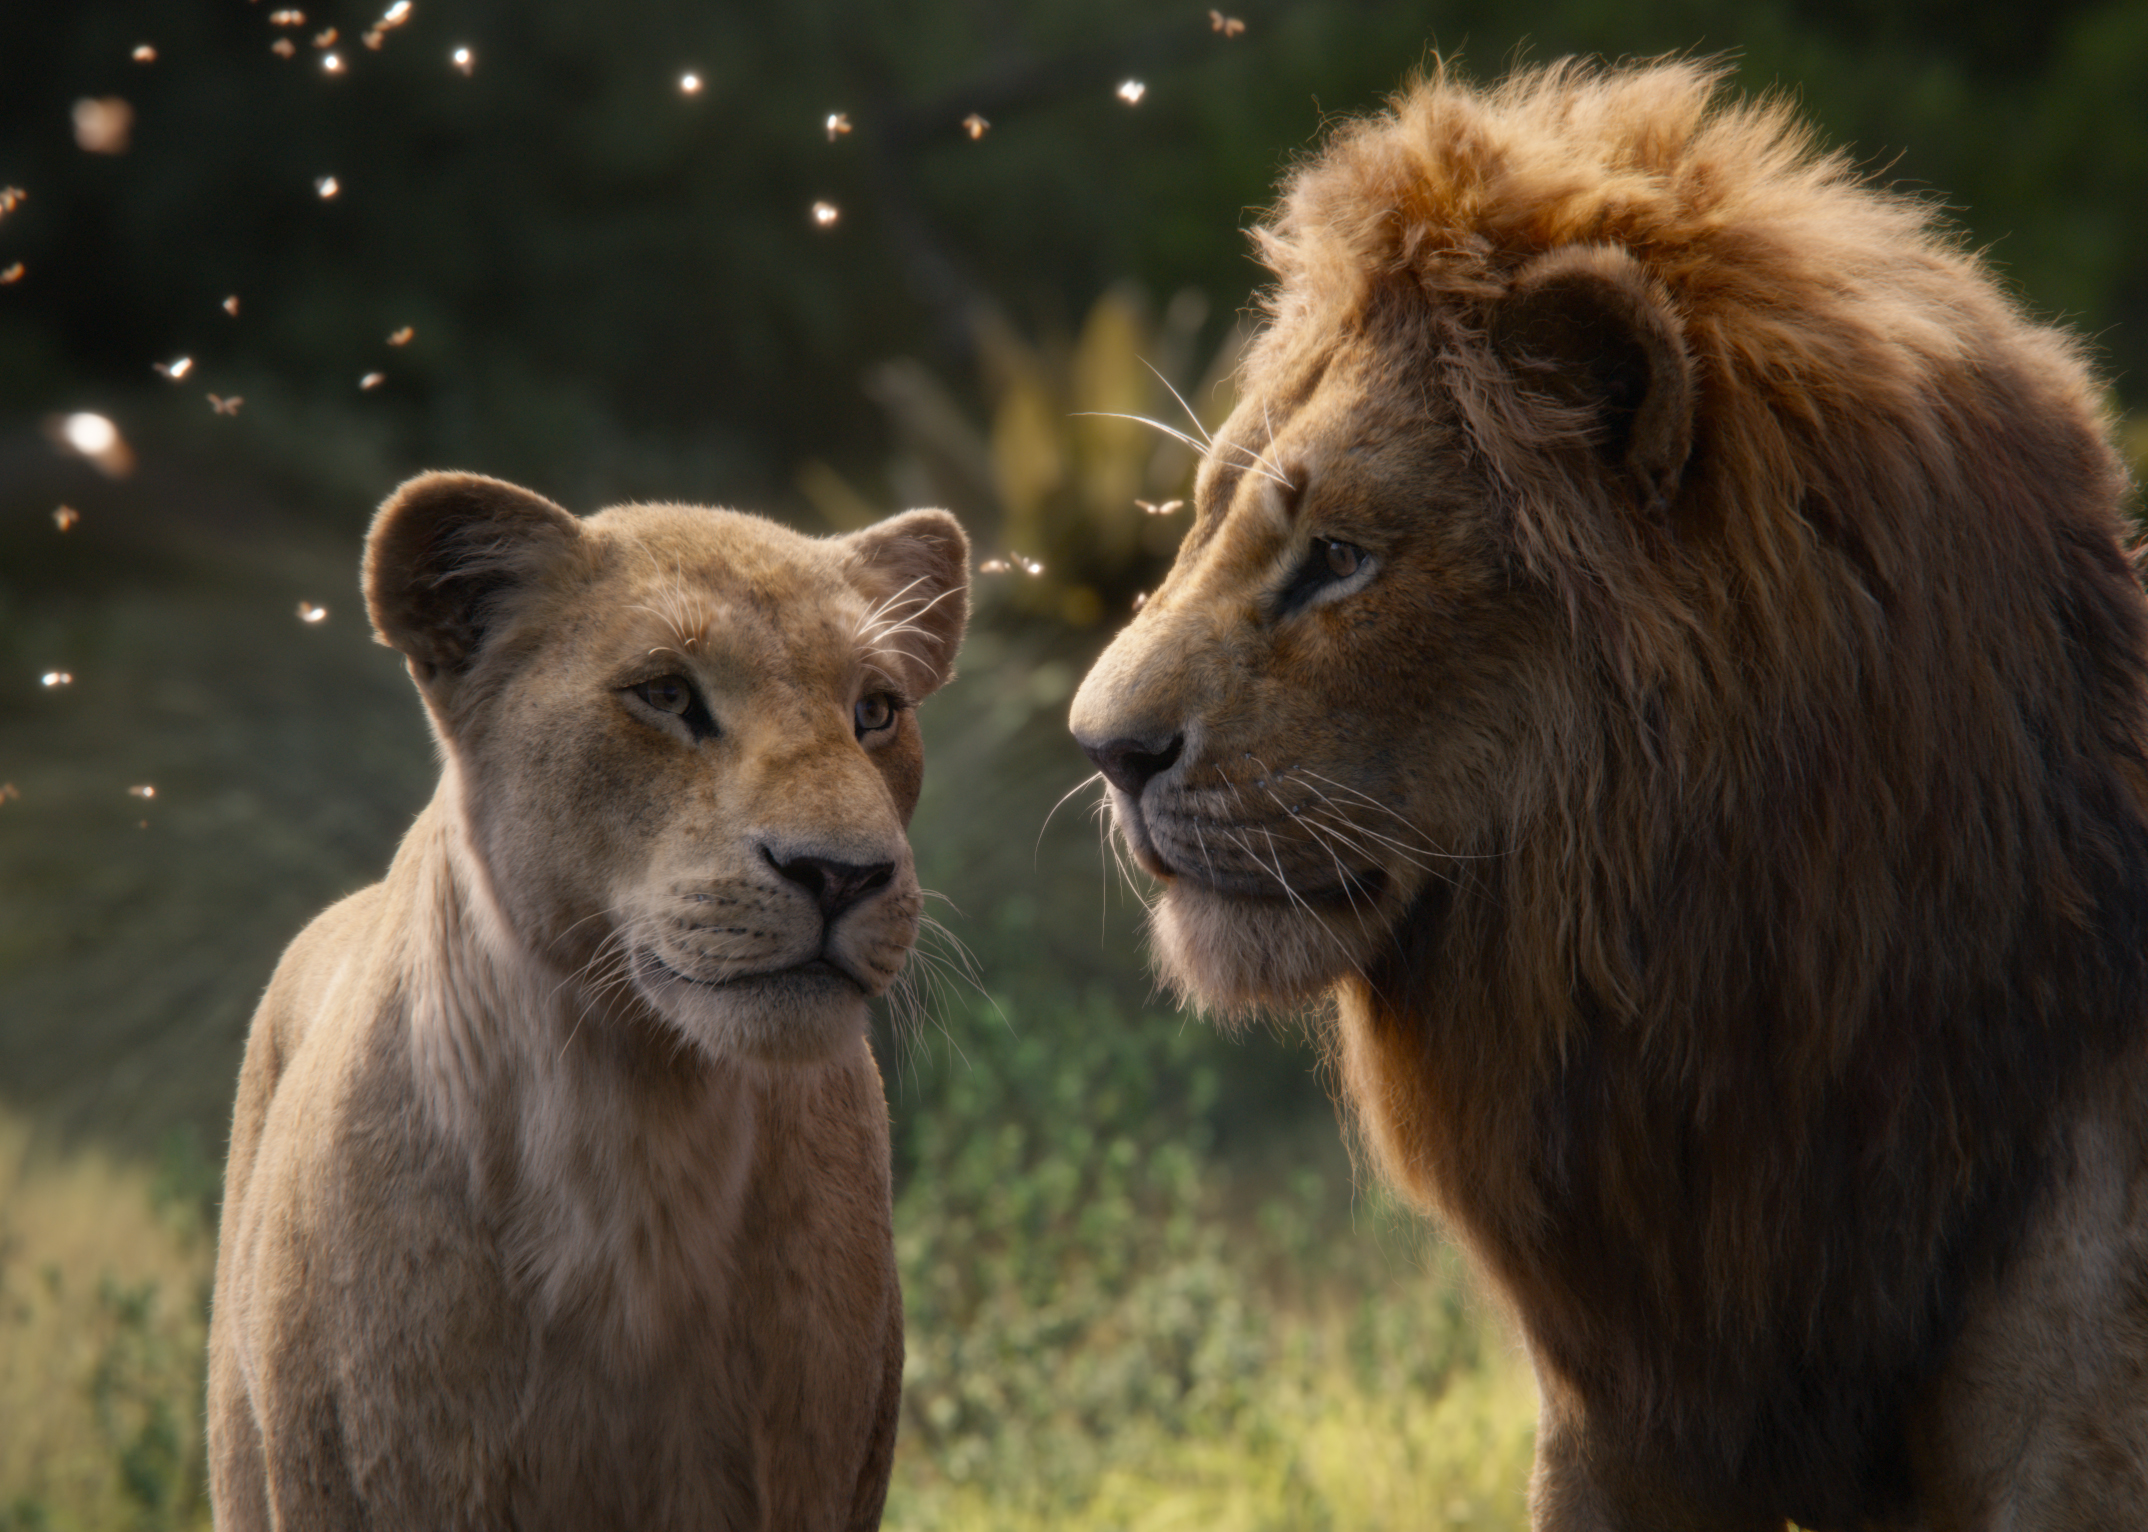 40+ The Lion King (2019) HD Wallpapers and Backgrounds